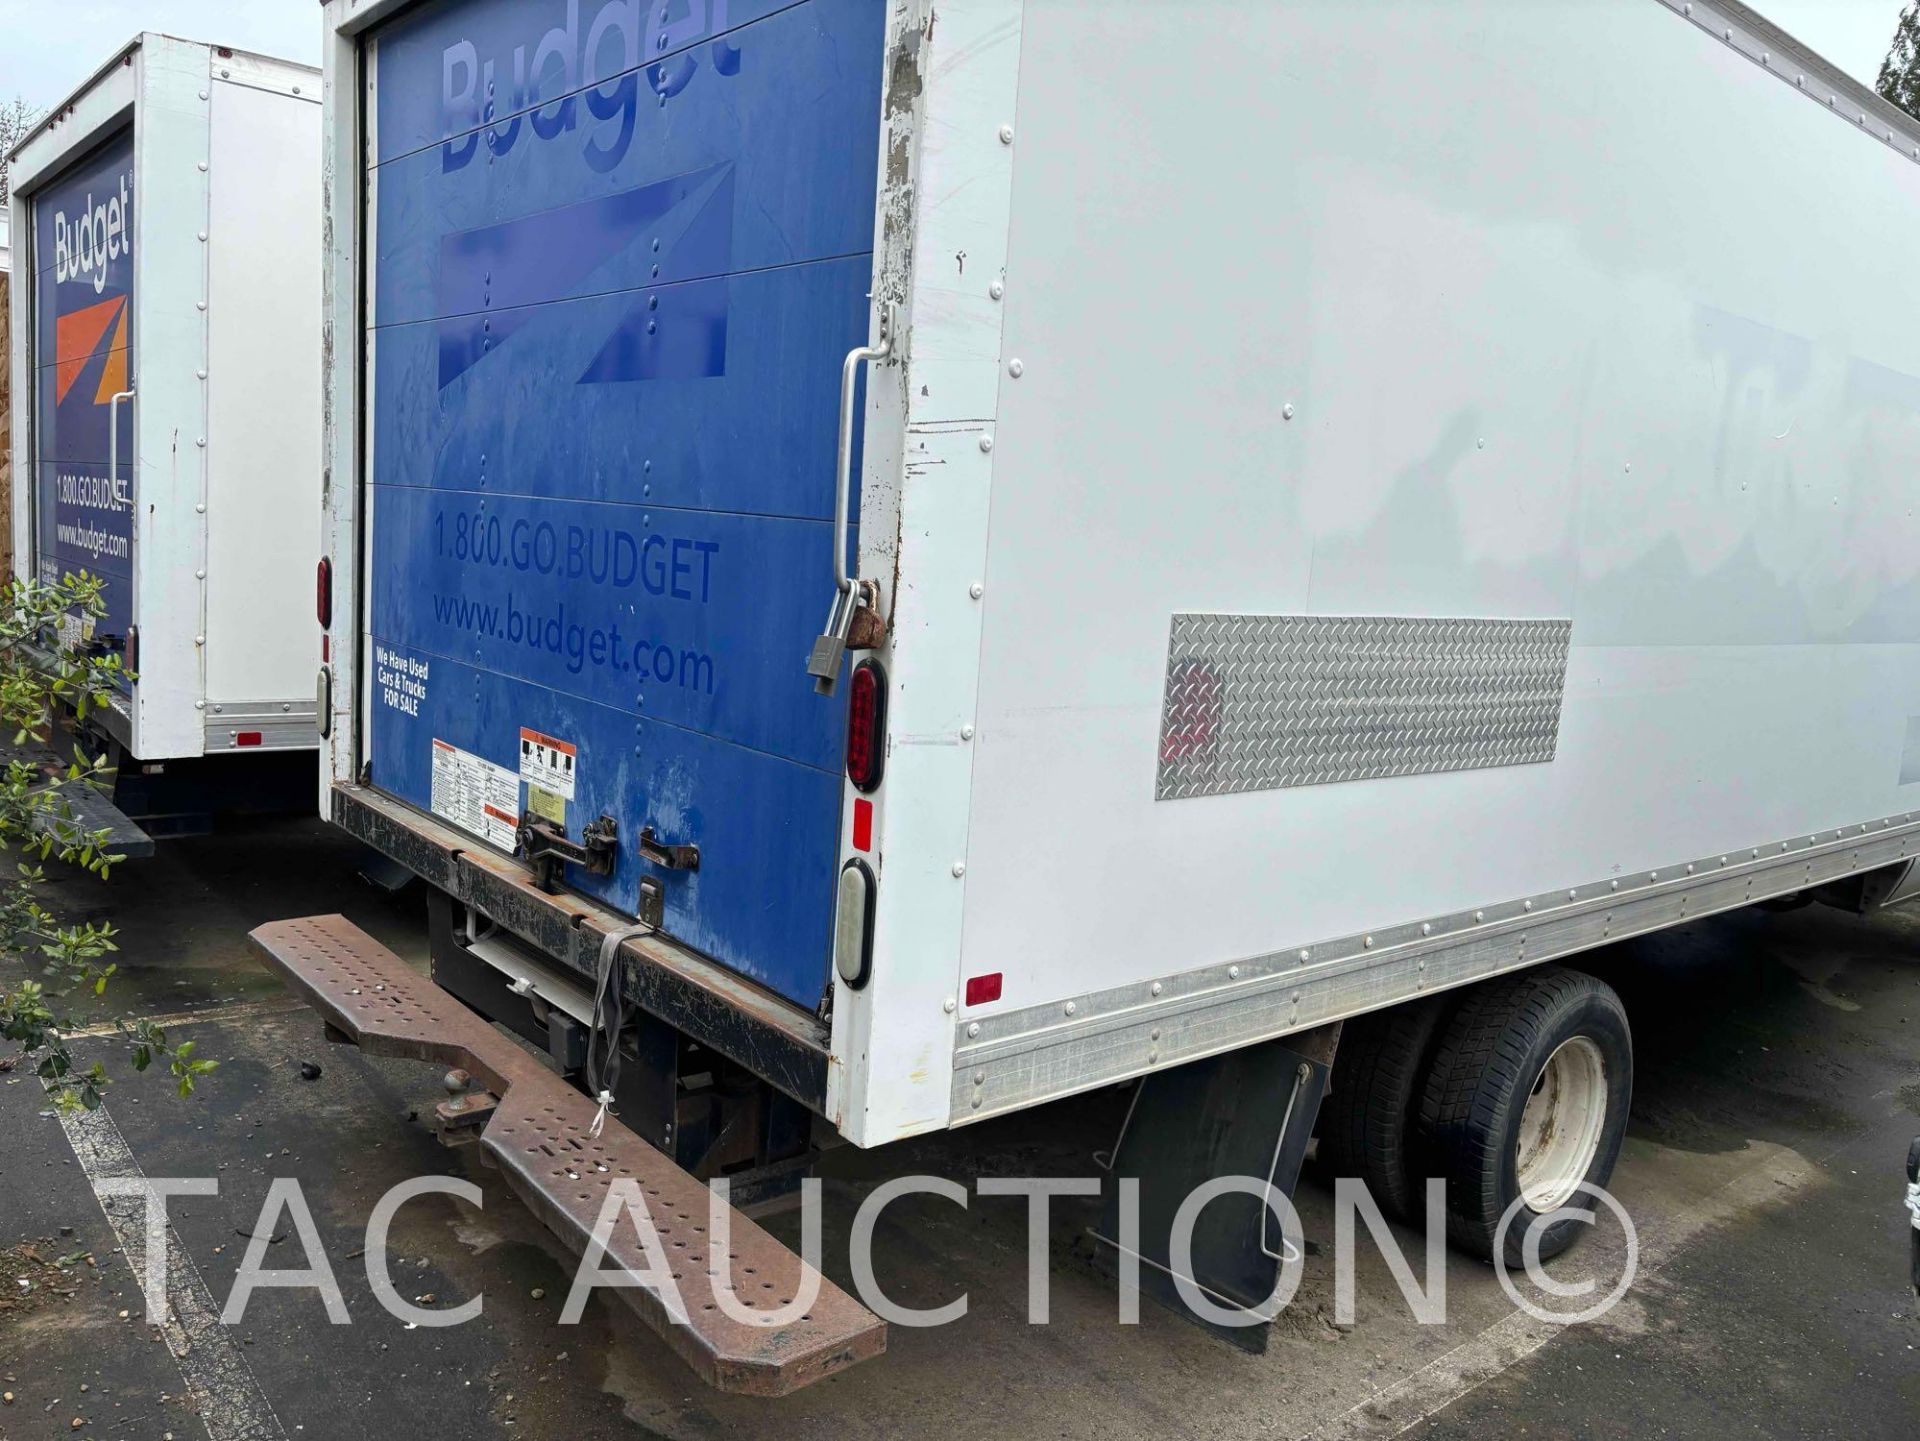 2015 Ford E-350 16ft Box Truck - Image 76 of 98